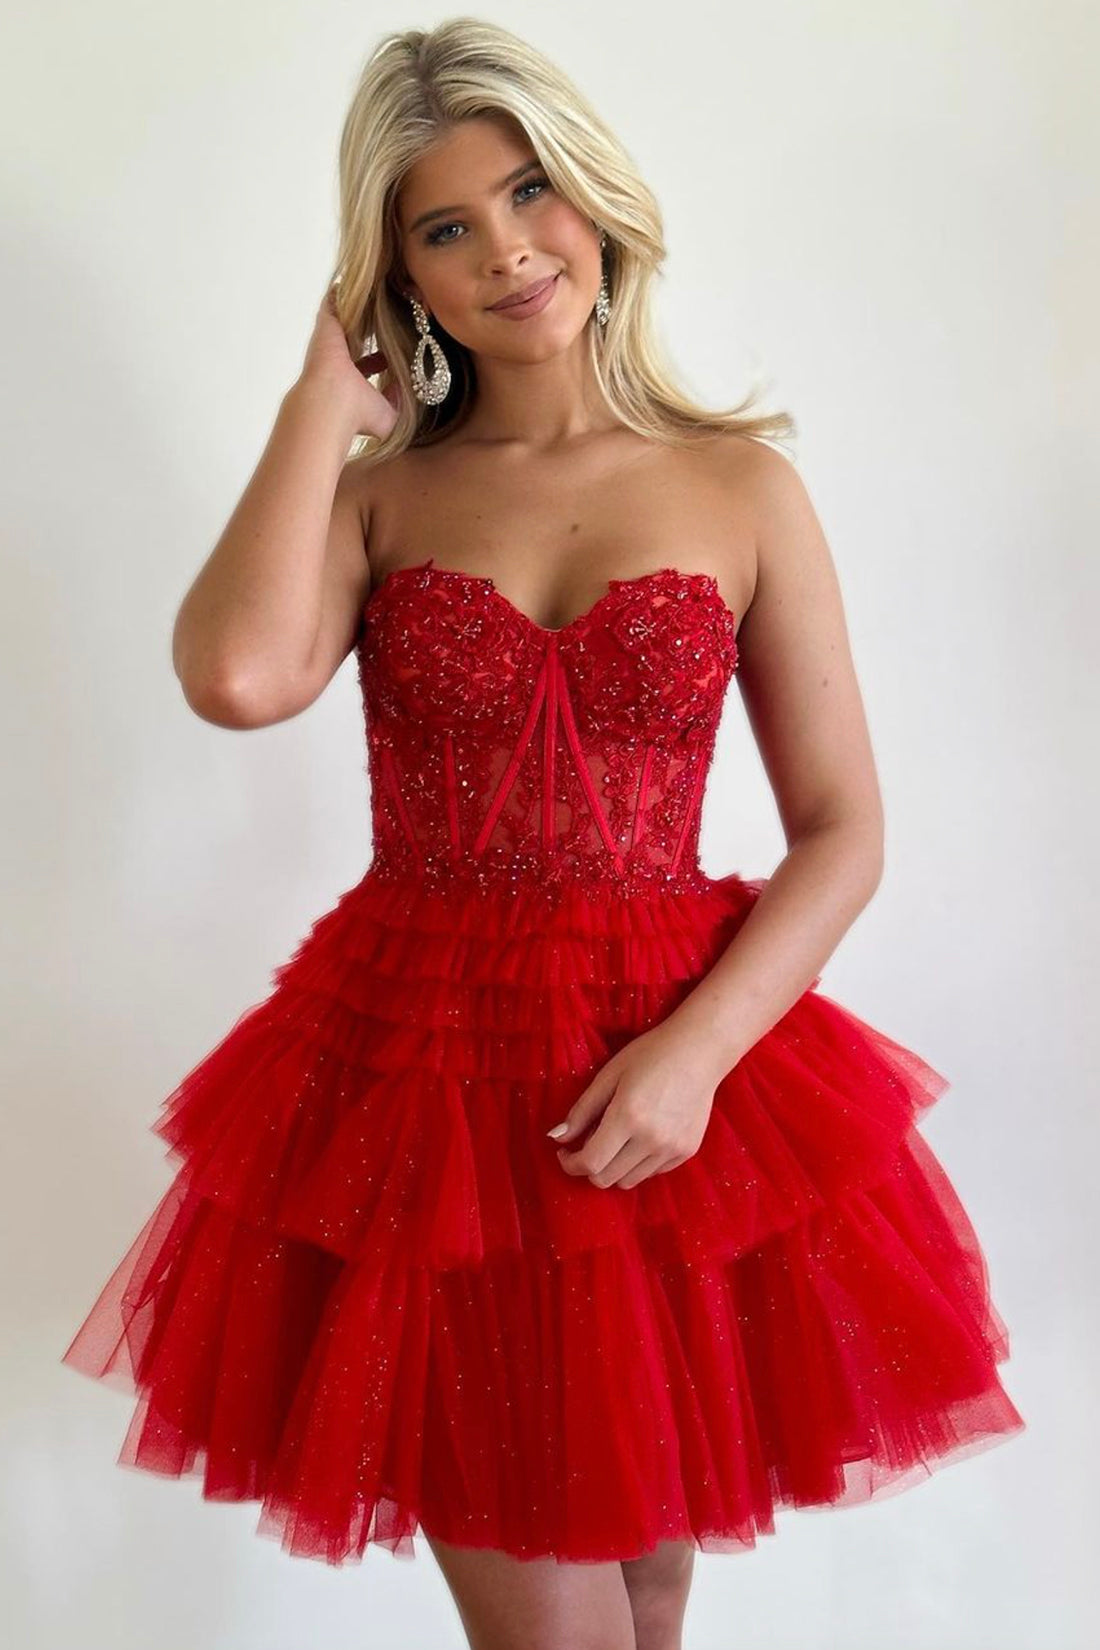 Cute Sweetheart Neck Beaded Red Lace Prom Dresses, Red Strapless Homecoming Dresses